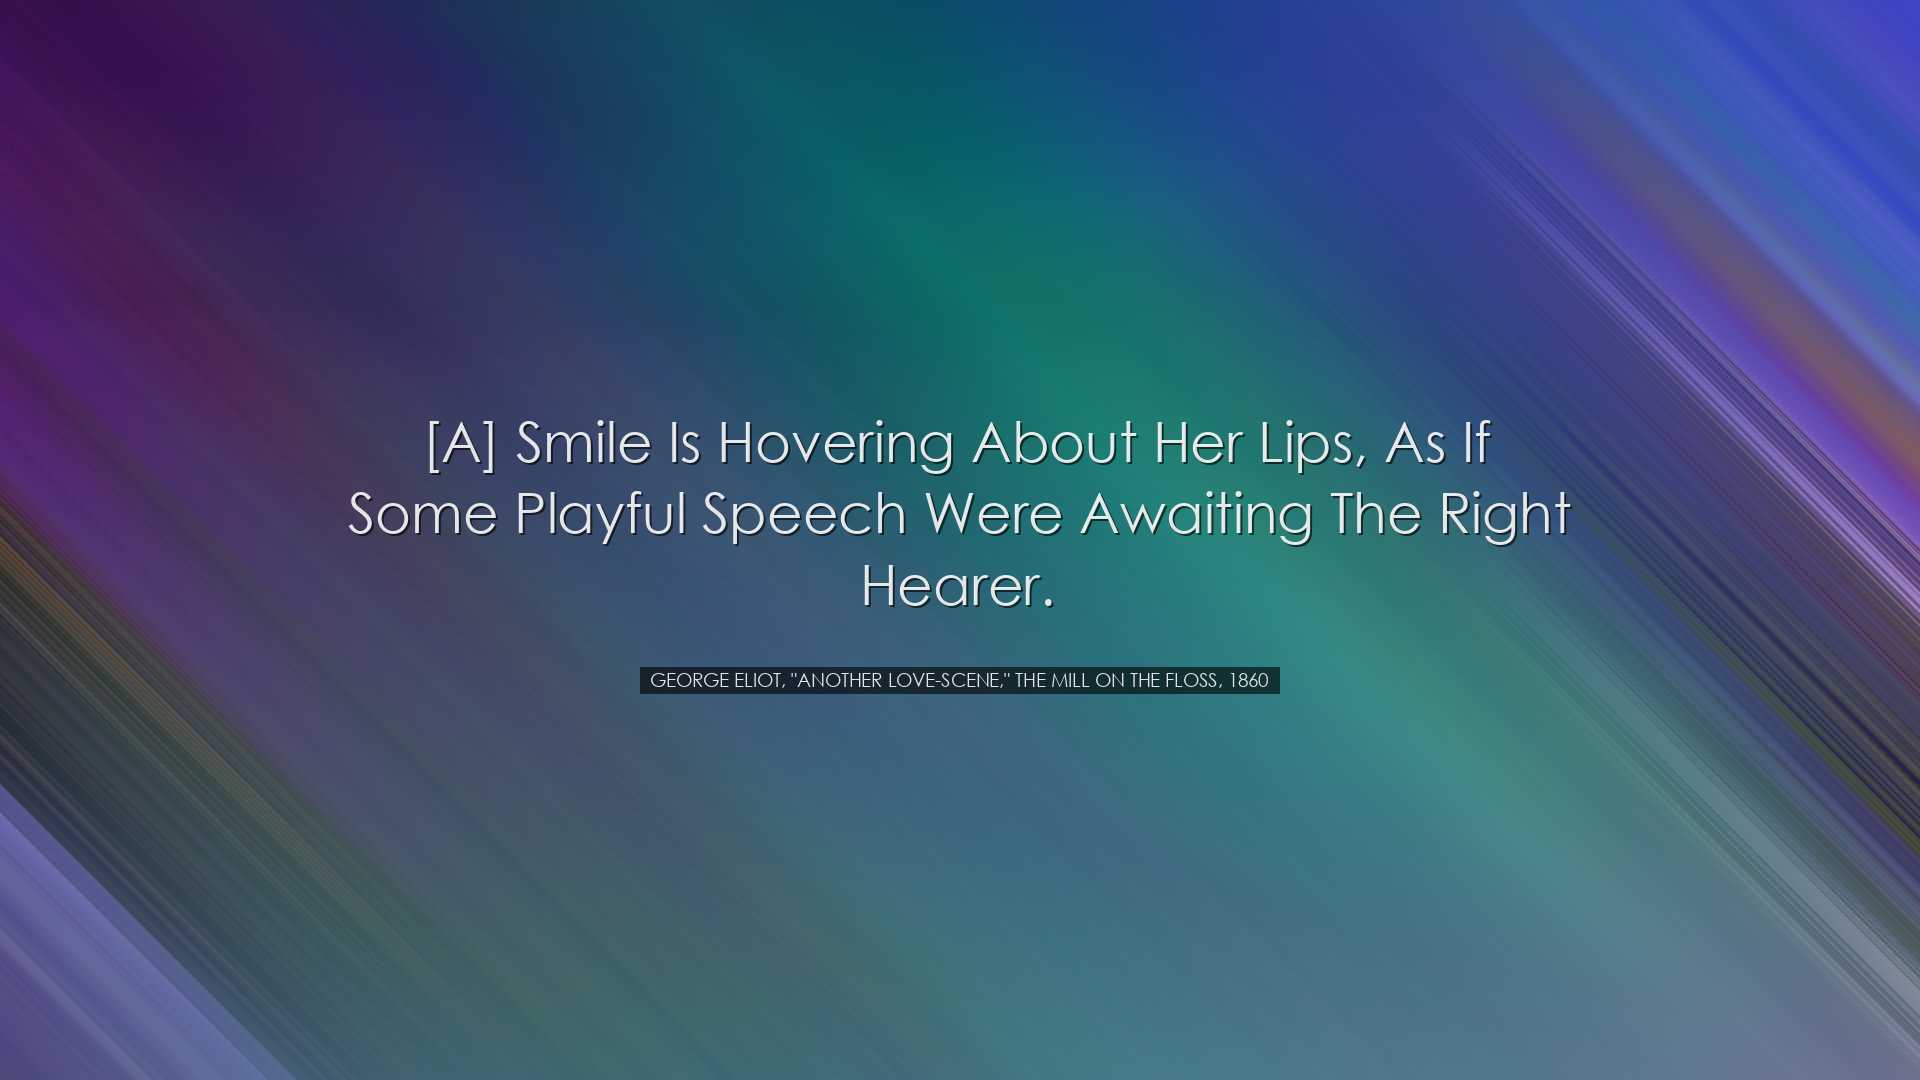 [A] smile is hovering about her lips, as if some playful speech we